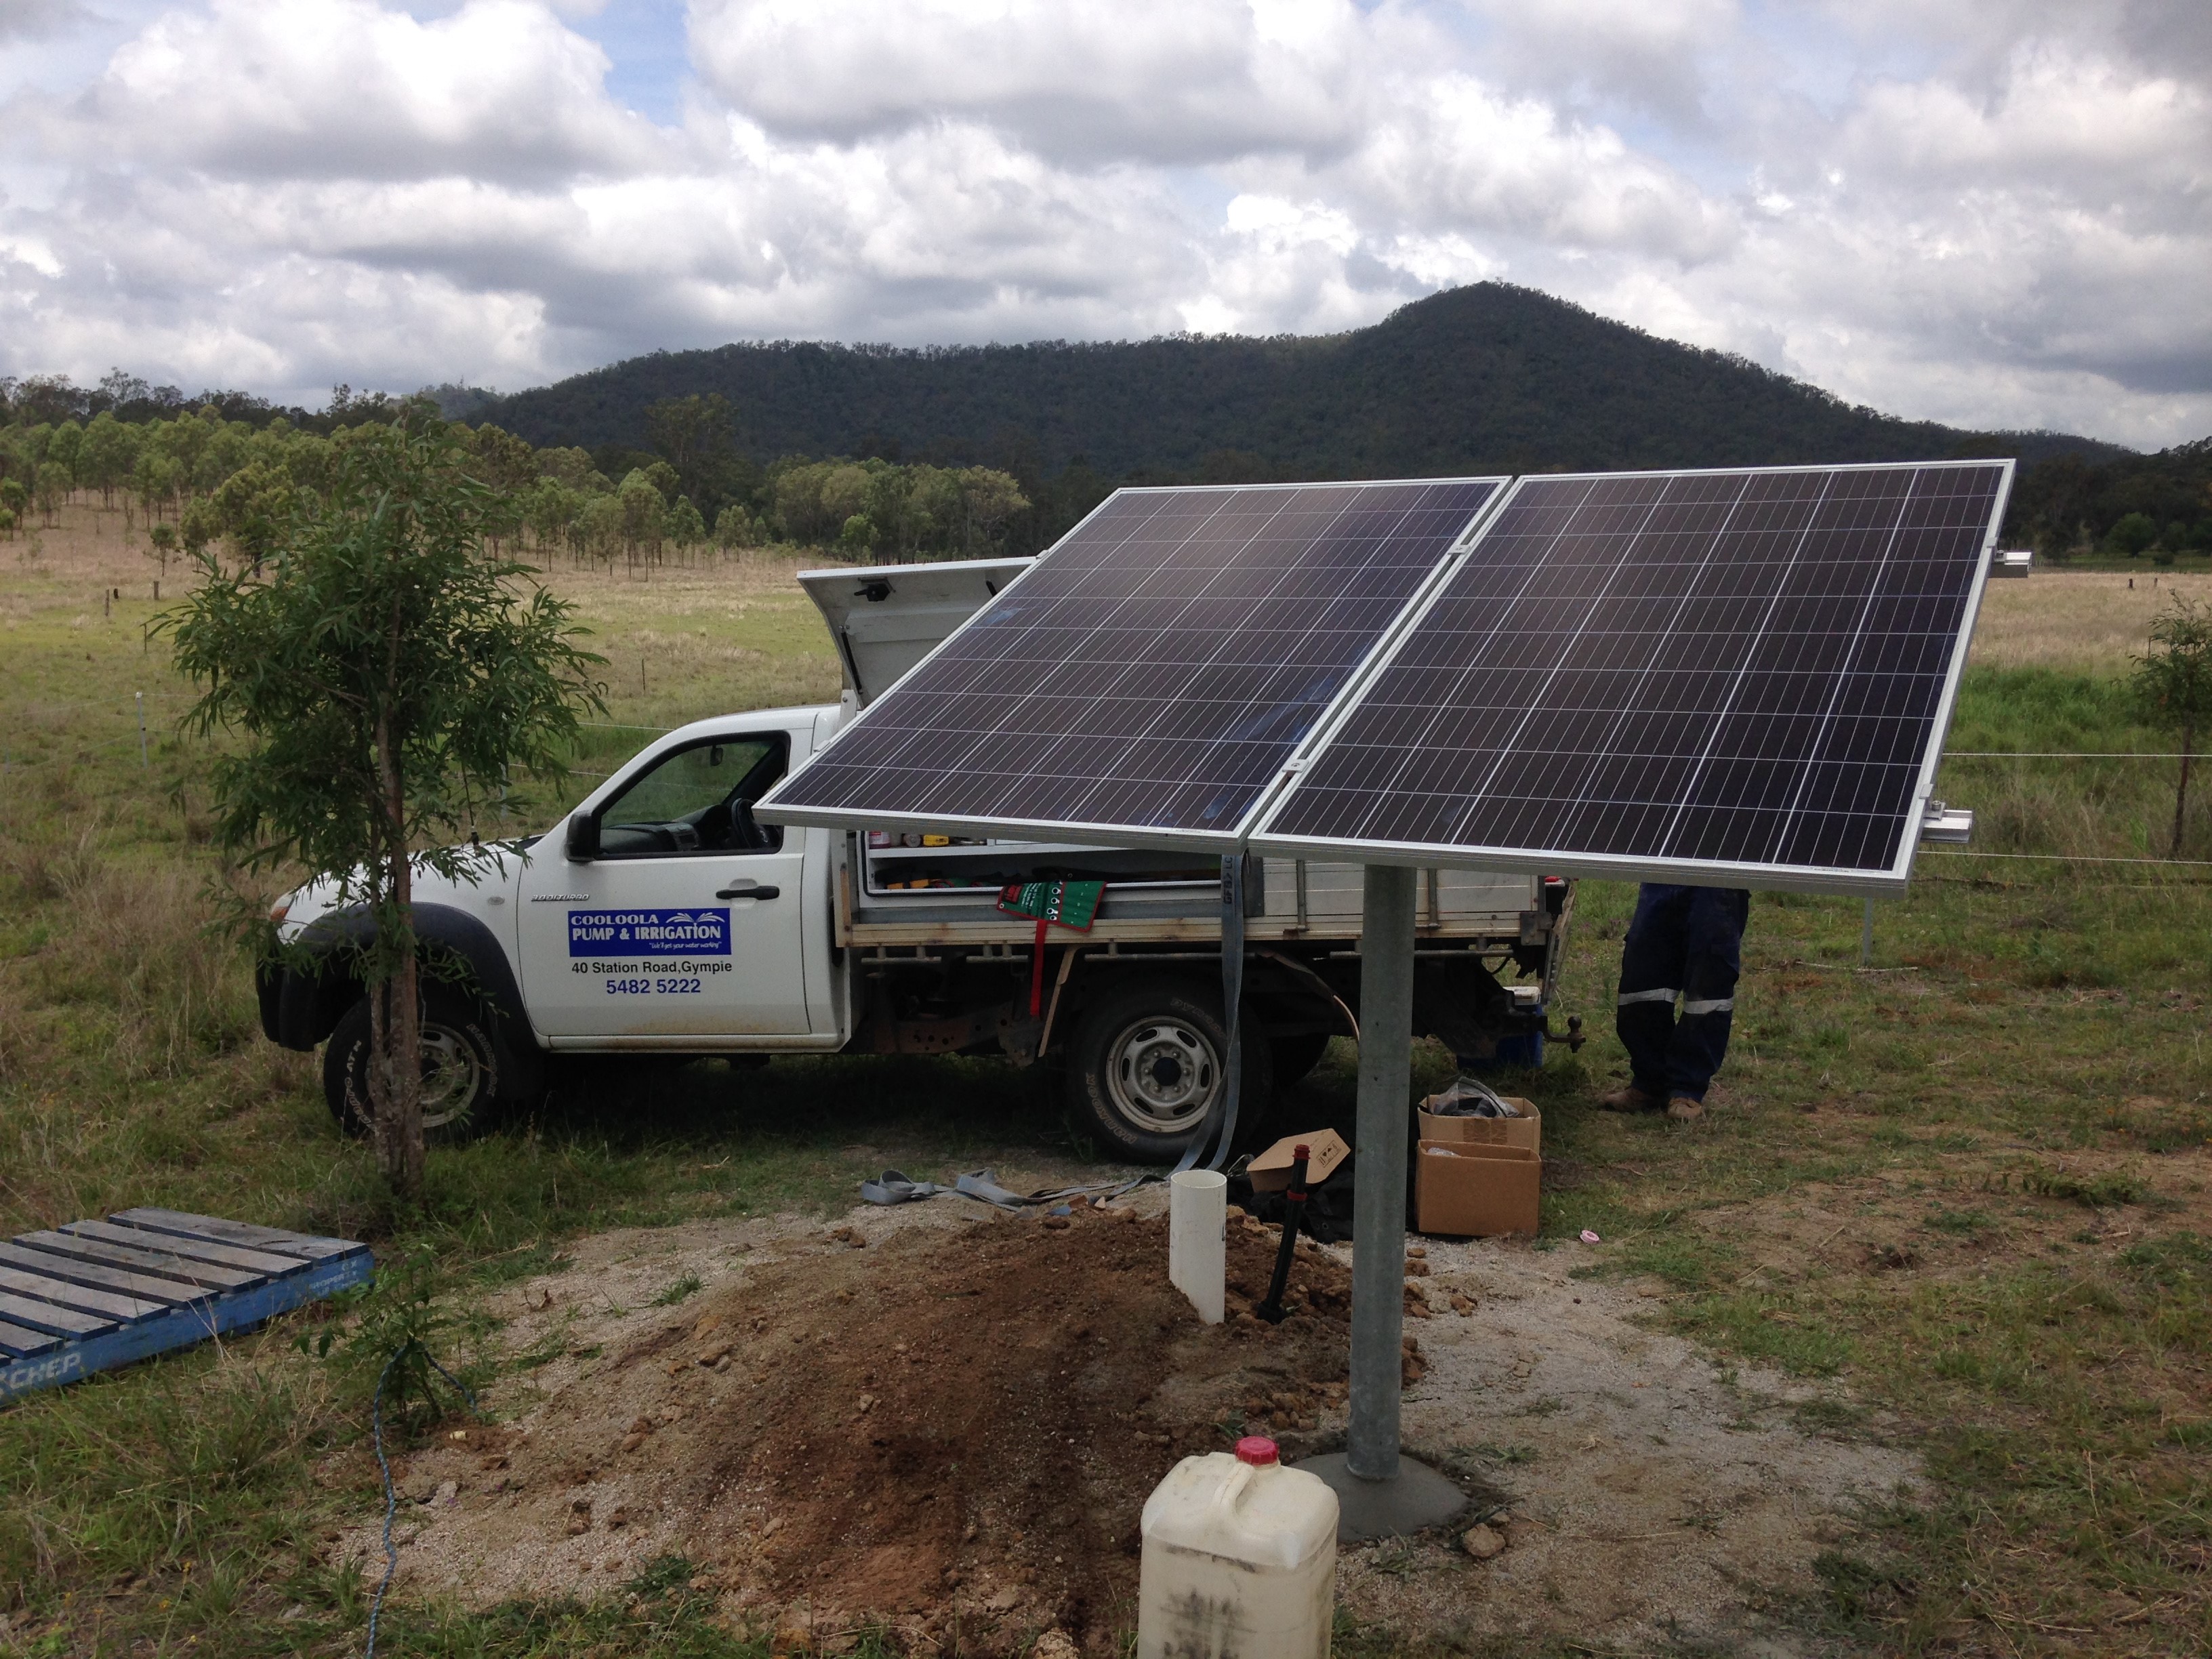 Cooloola Pump and Irrigation Pty Ltd Gympie